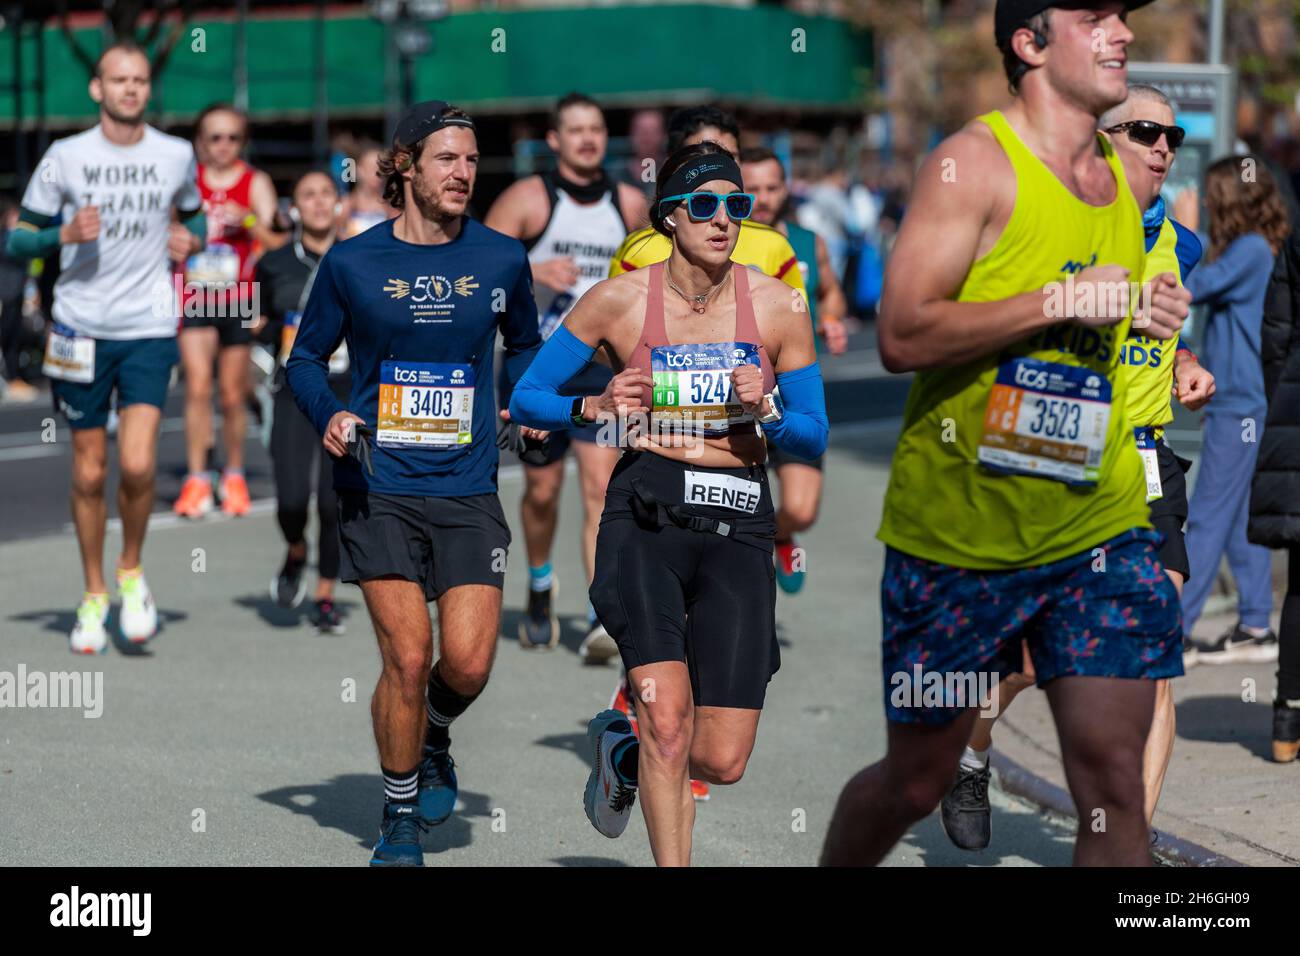 Runners pass through Harlem in New York near the 22 mile mark near Mount Morris Park on Sunday, November 7, 2019 in the 50th running of the TCS New York City Marathon. About 30,000 runners. down from the usual 50,000, participated in the race which was cancelled last year due to the pandemic.  (© Richard B. Levine) Stock Photo